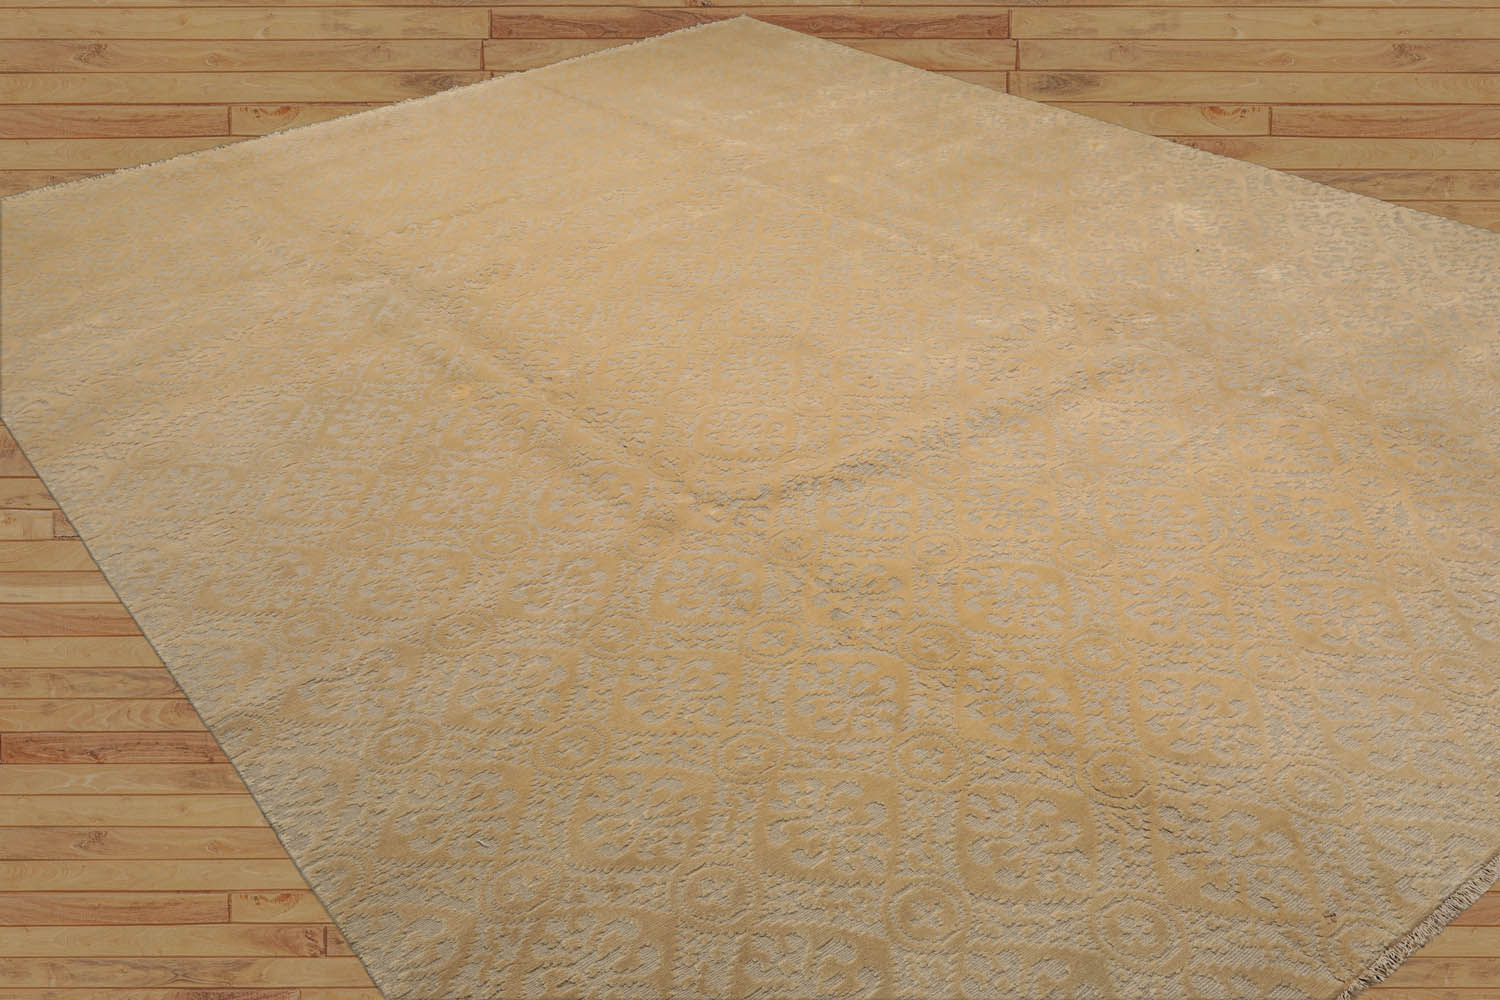 Baugh 9x12 Hand Knotted Tibetan Wool and Silk Modern & Contemporary Oriental Area Rug Gray, Light Gold Color